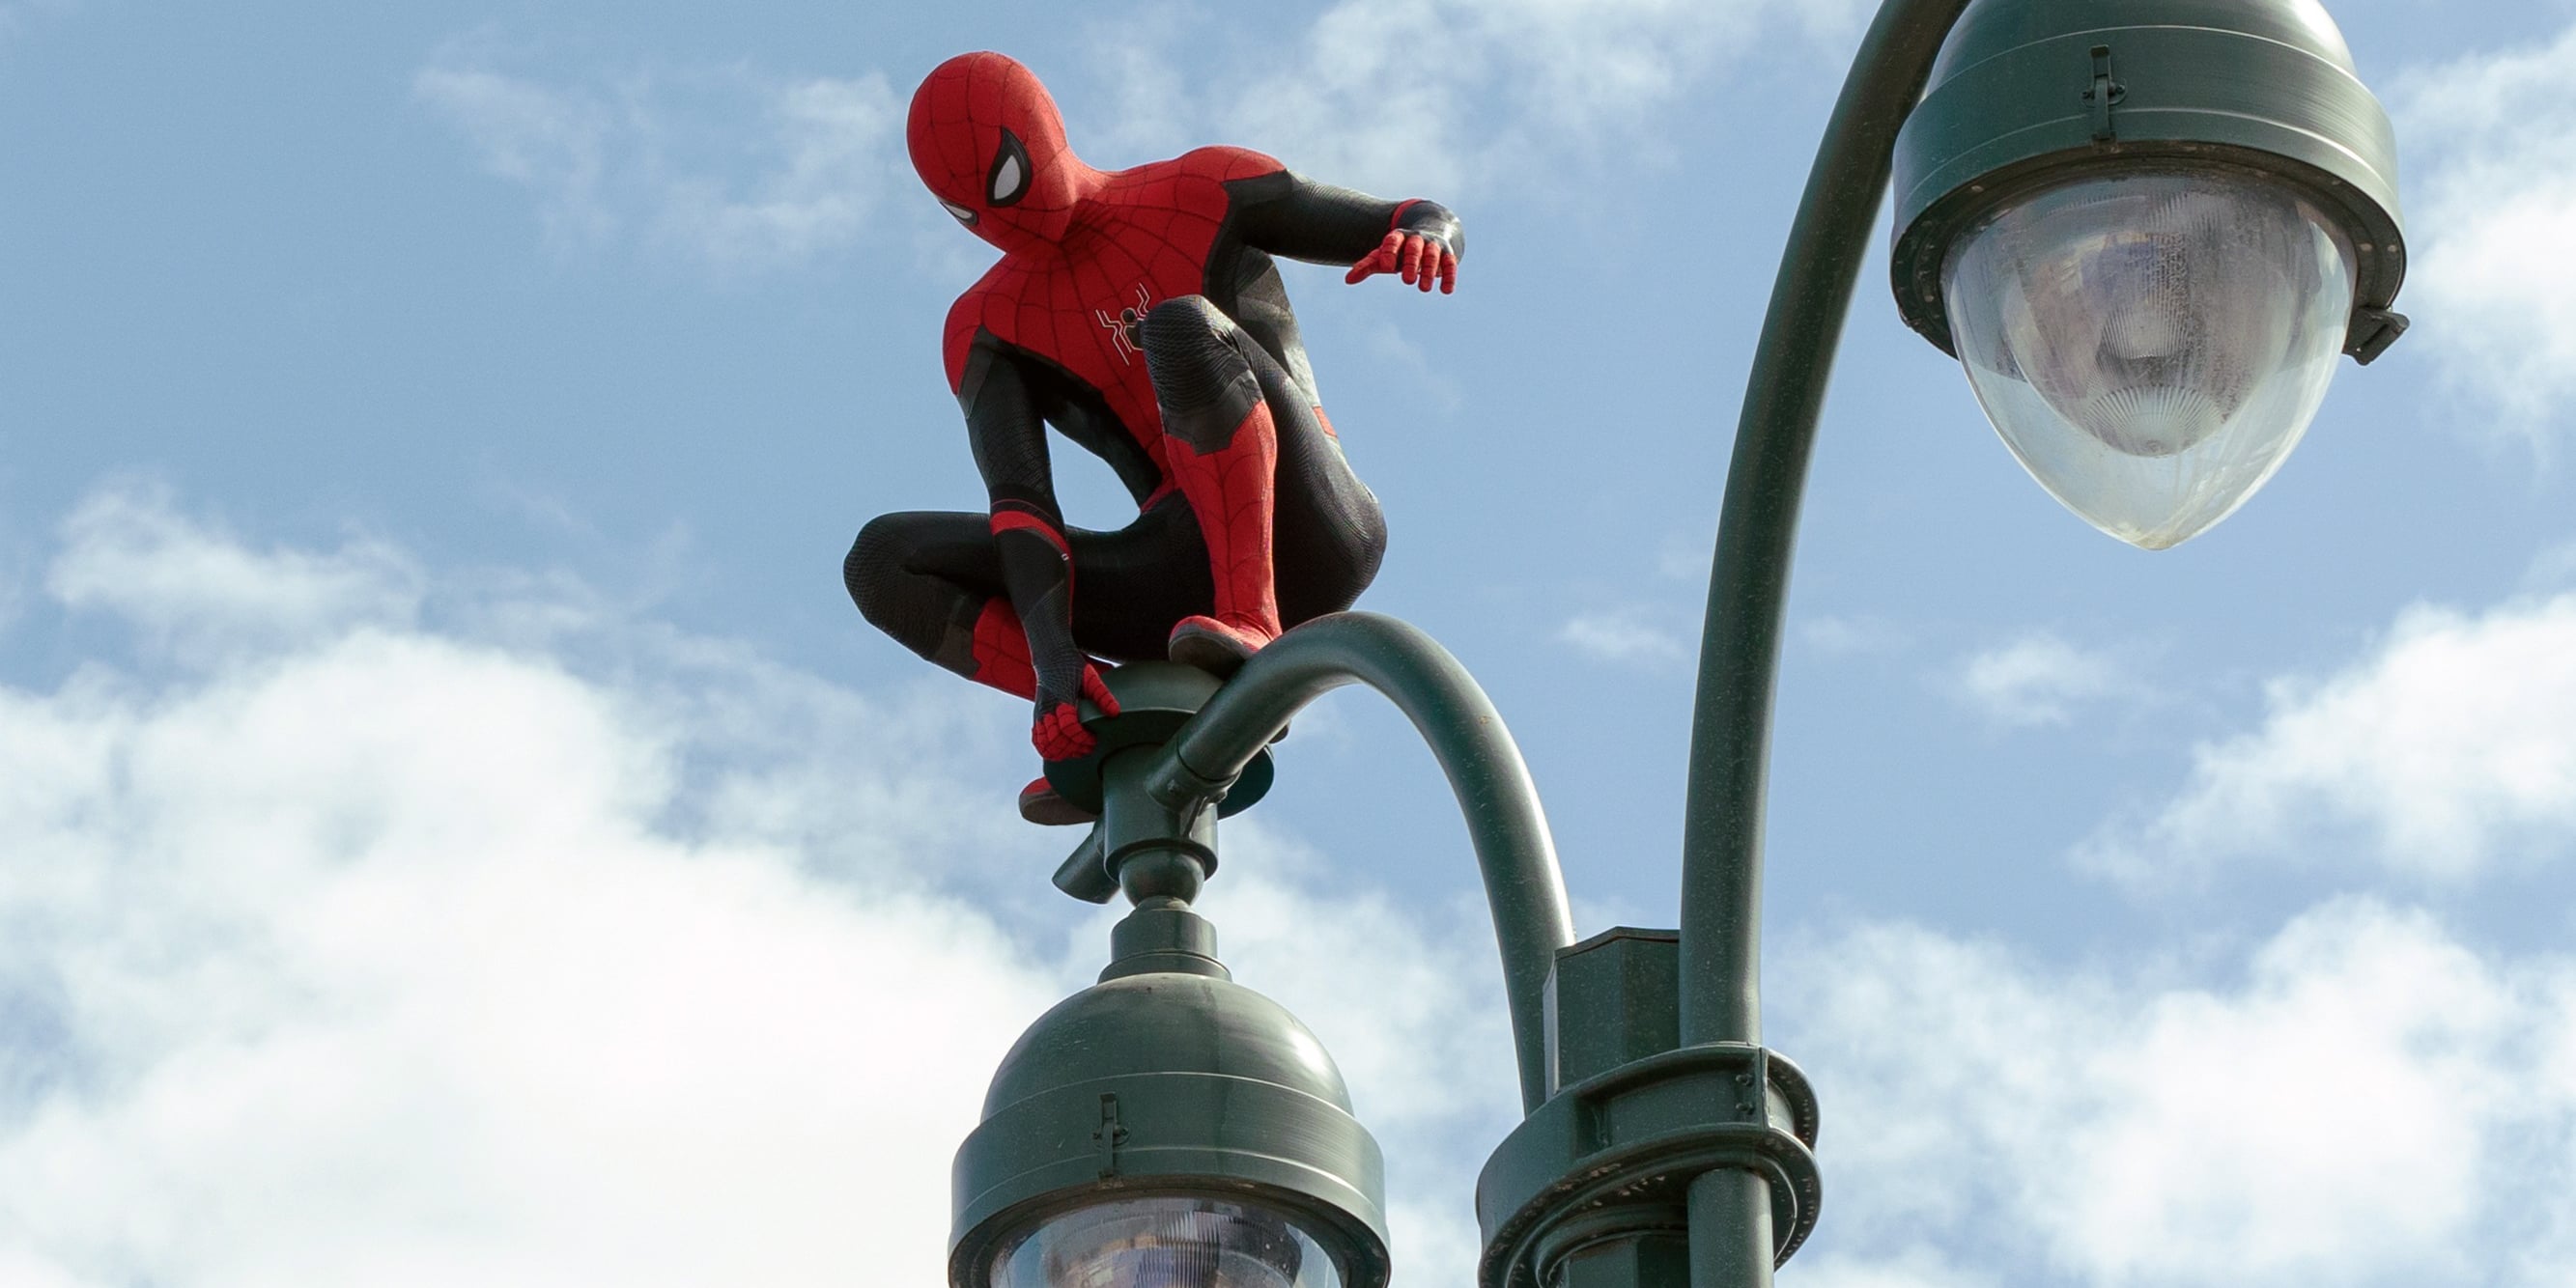 Amazing representation packs a punch in Marvel's Spider-Man 2